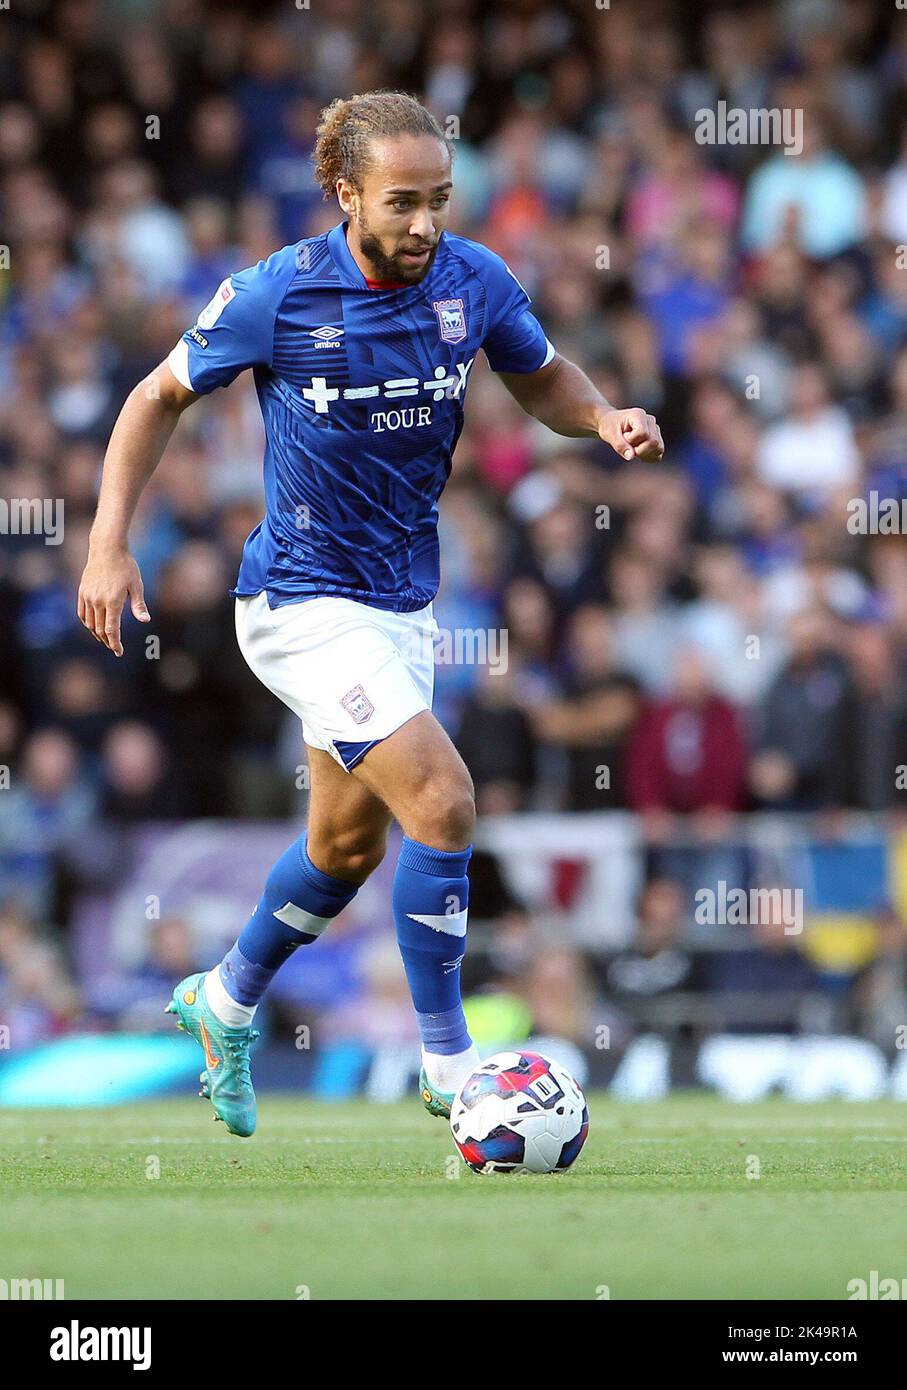 Ipswich, UK. 01st Oct, 2022. Marcus Harness of Ipswich Town runs with the ball during the Sky Bet League One match between Ipswich Town and Portsmouth at Portman Road on October 1st 2022 in Ipswich, England. (Photo by Mick Kearns/phcimages.com) Credit: PHC Images/Alamy Live News Stock Photo